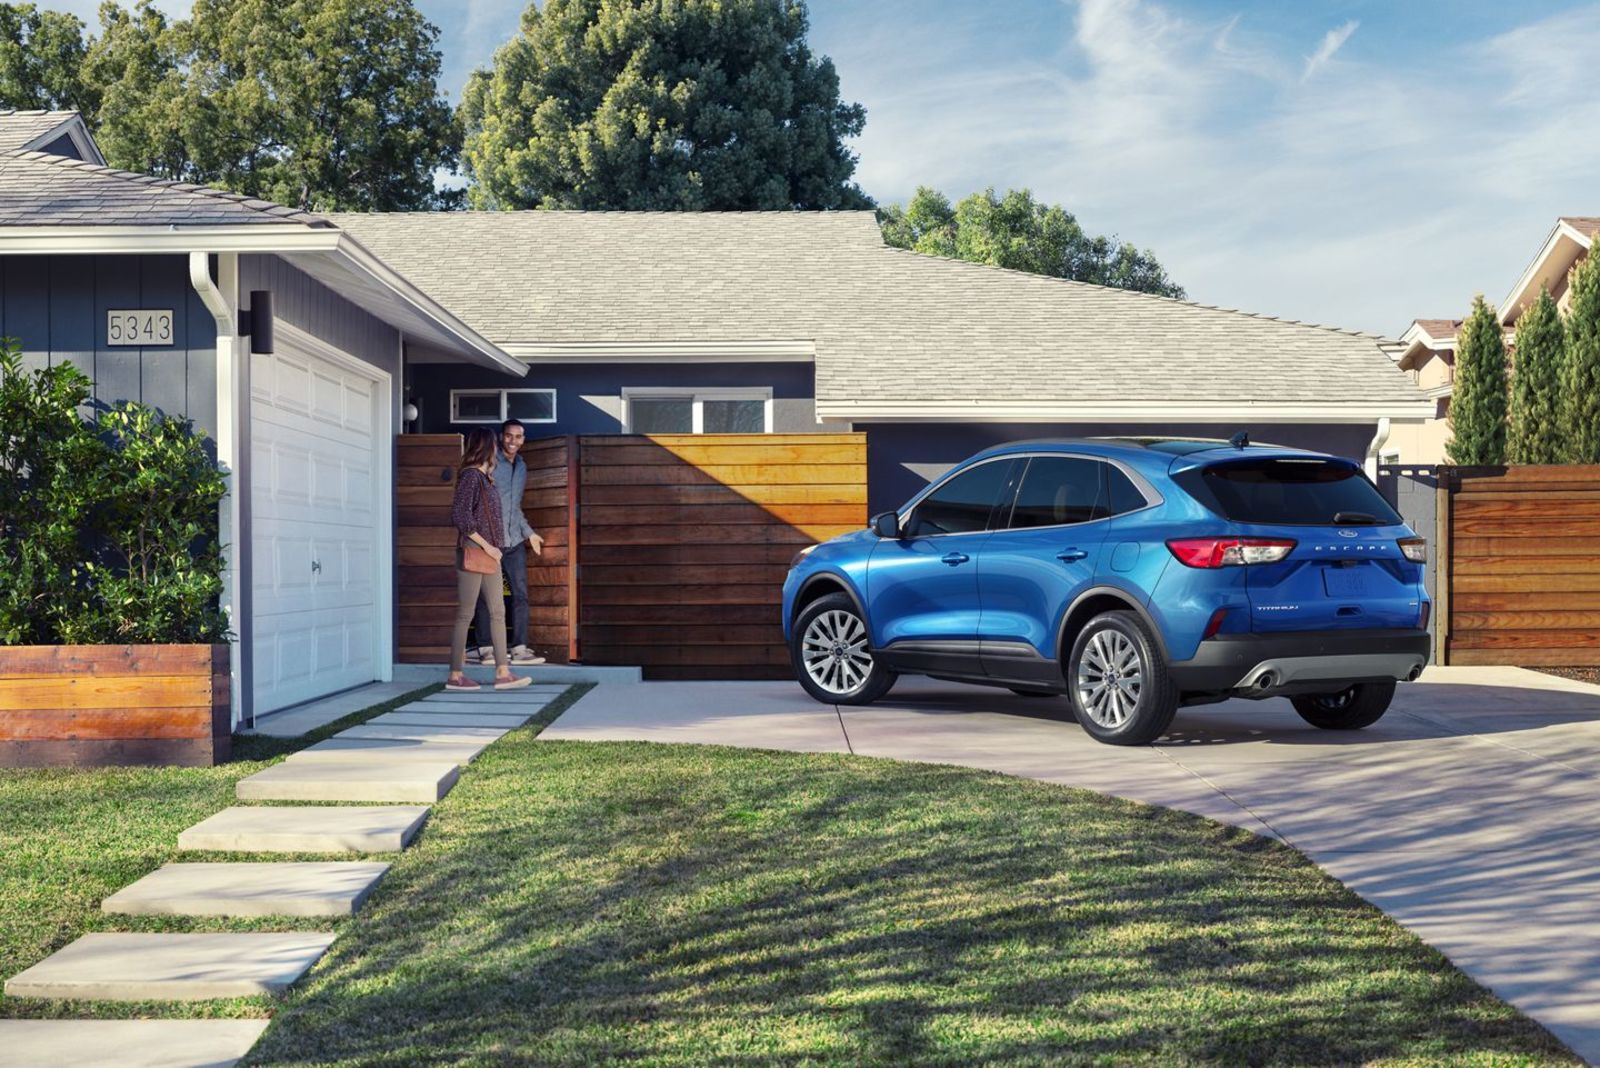 Illustration for article titled 2020 Ford Escape starts at $24,885